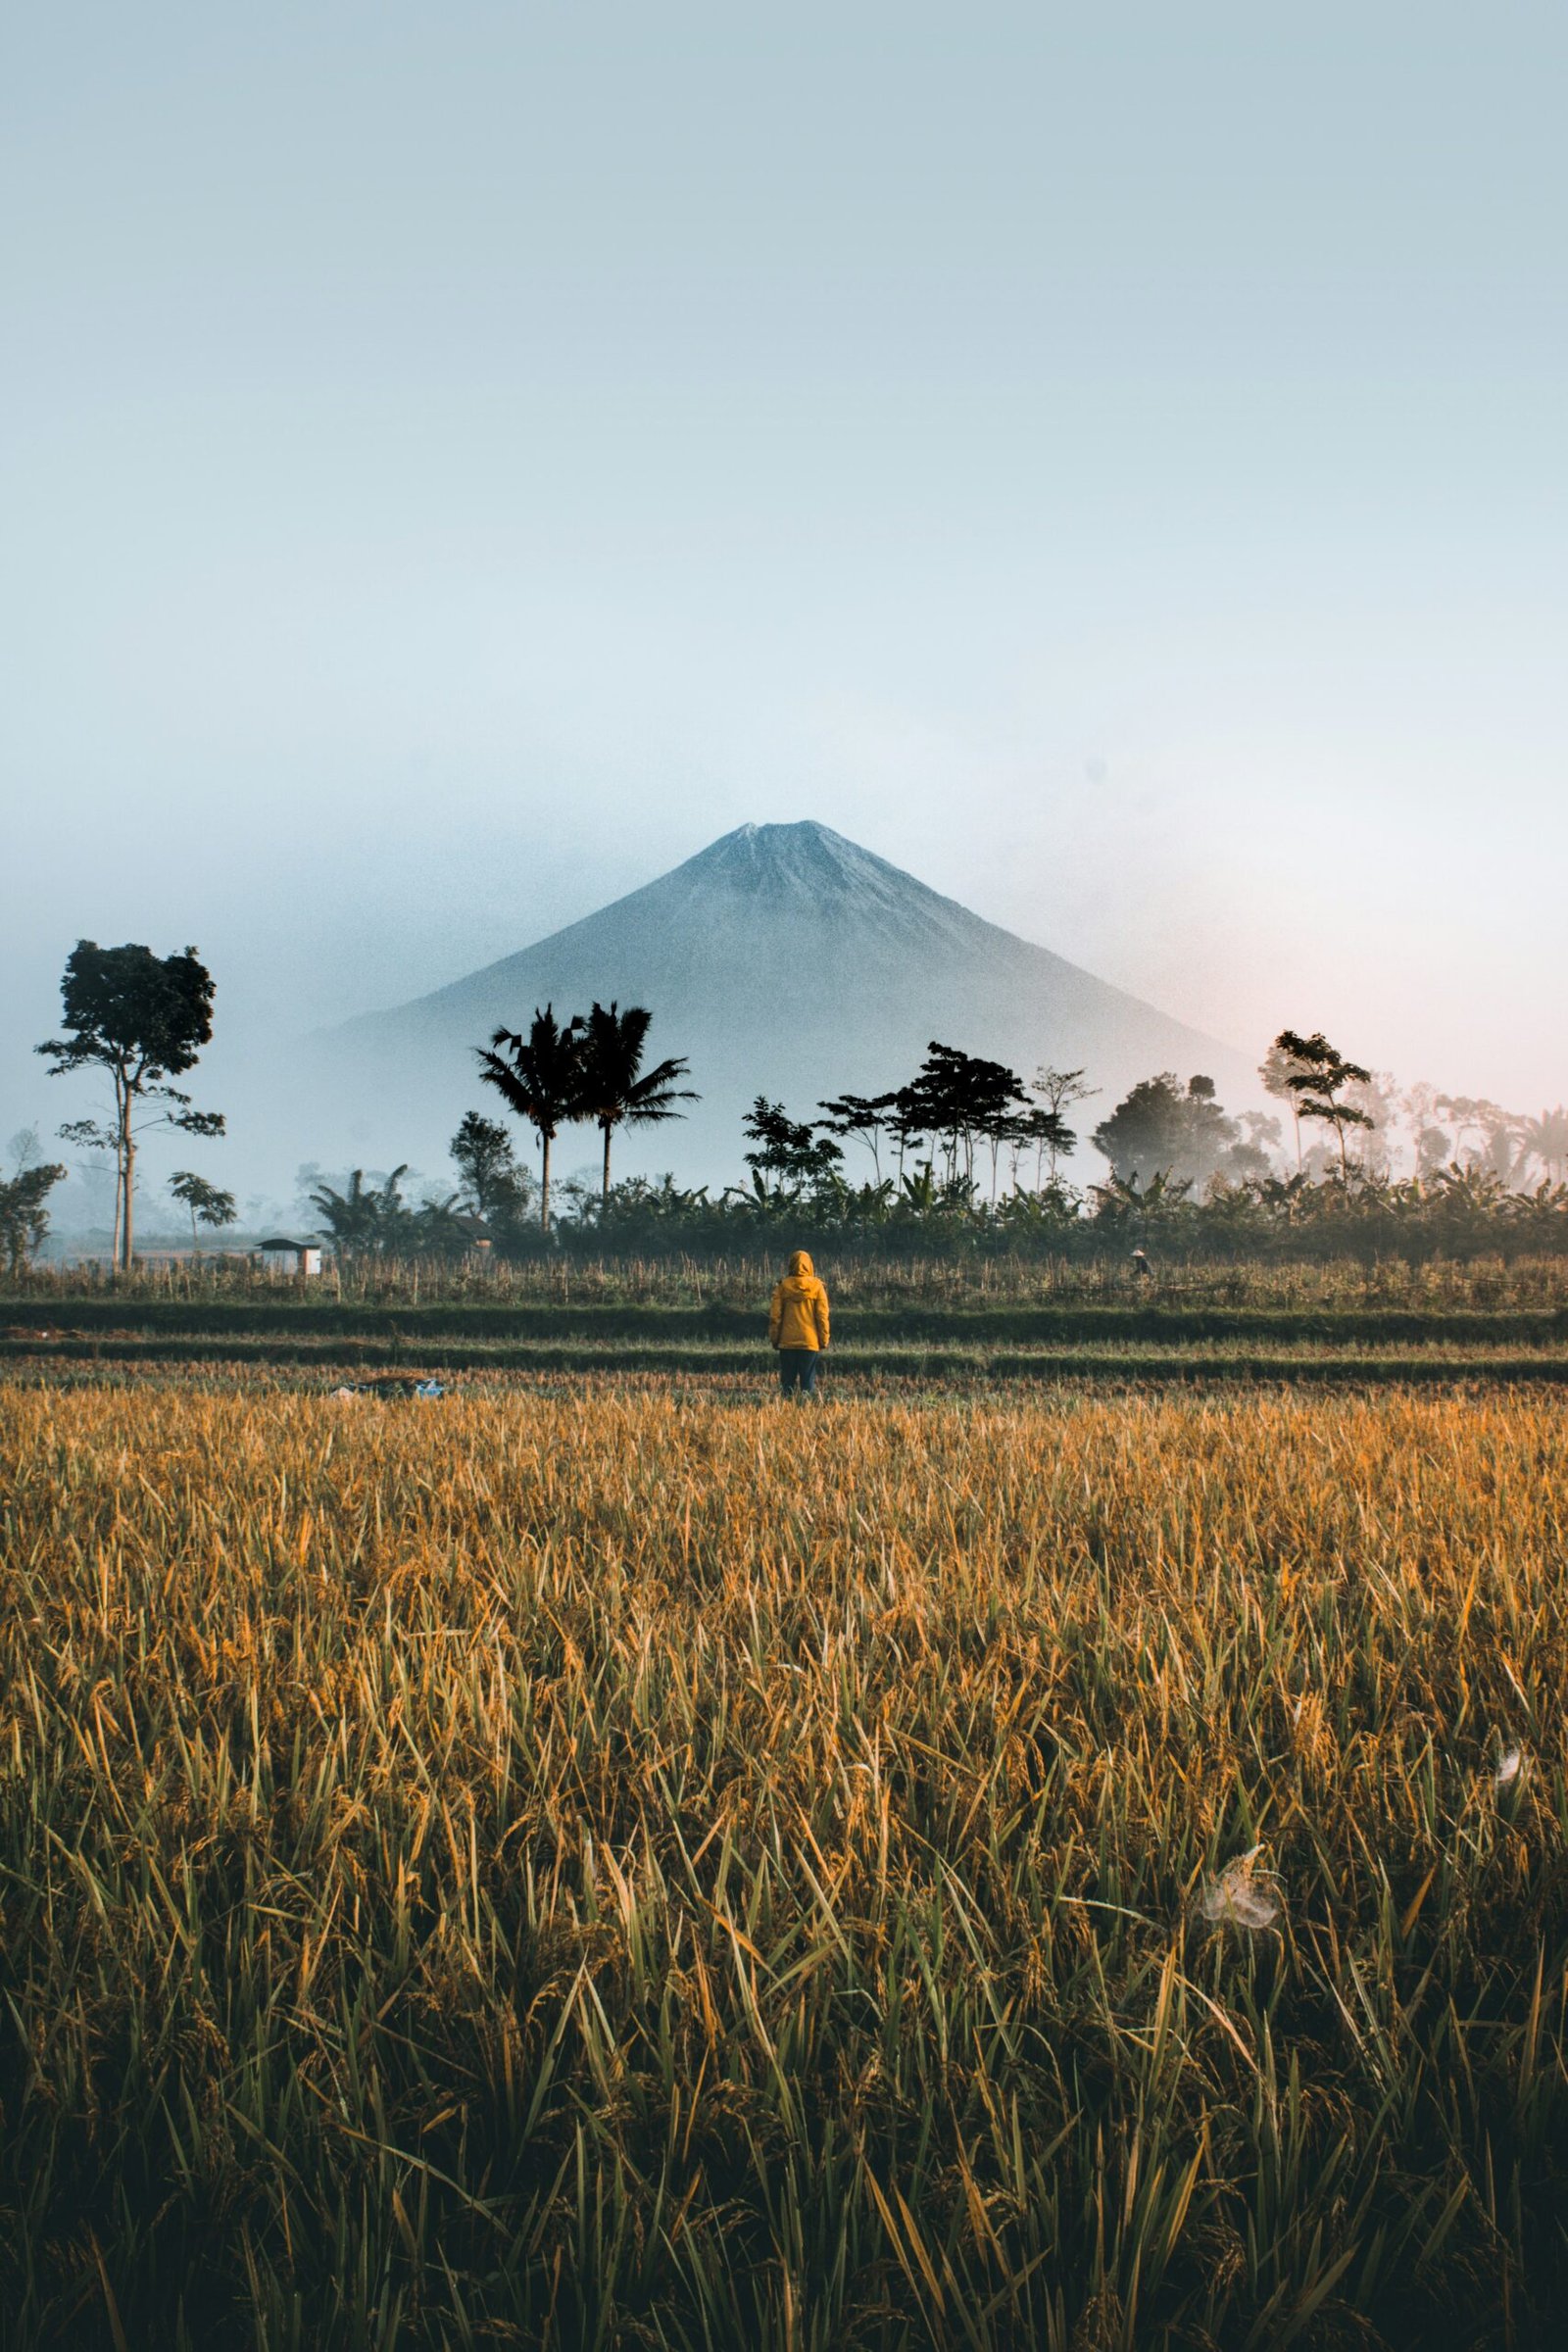 Indonesian Commodities for Farm Feed: A Bounty of Options